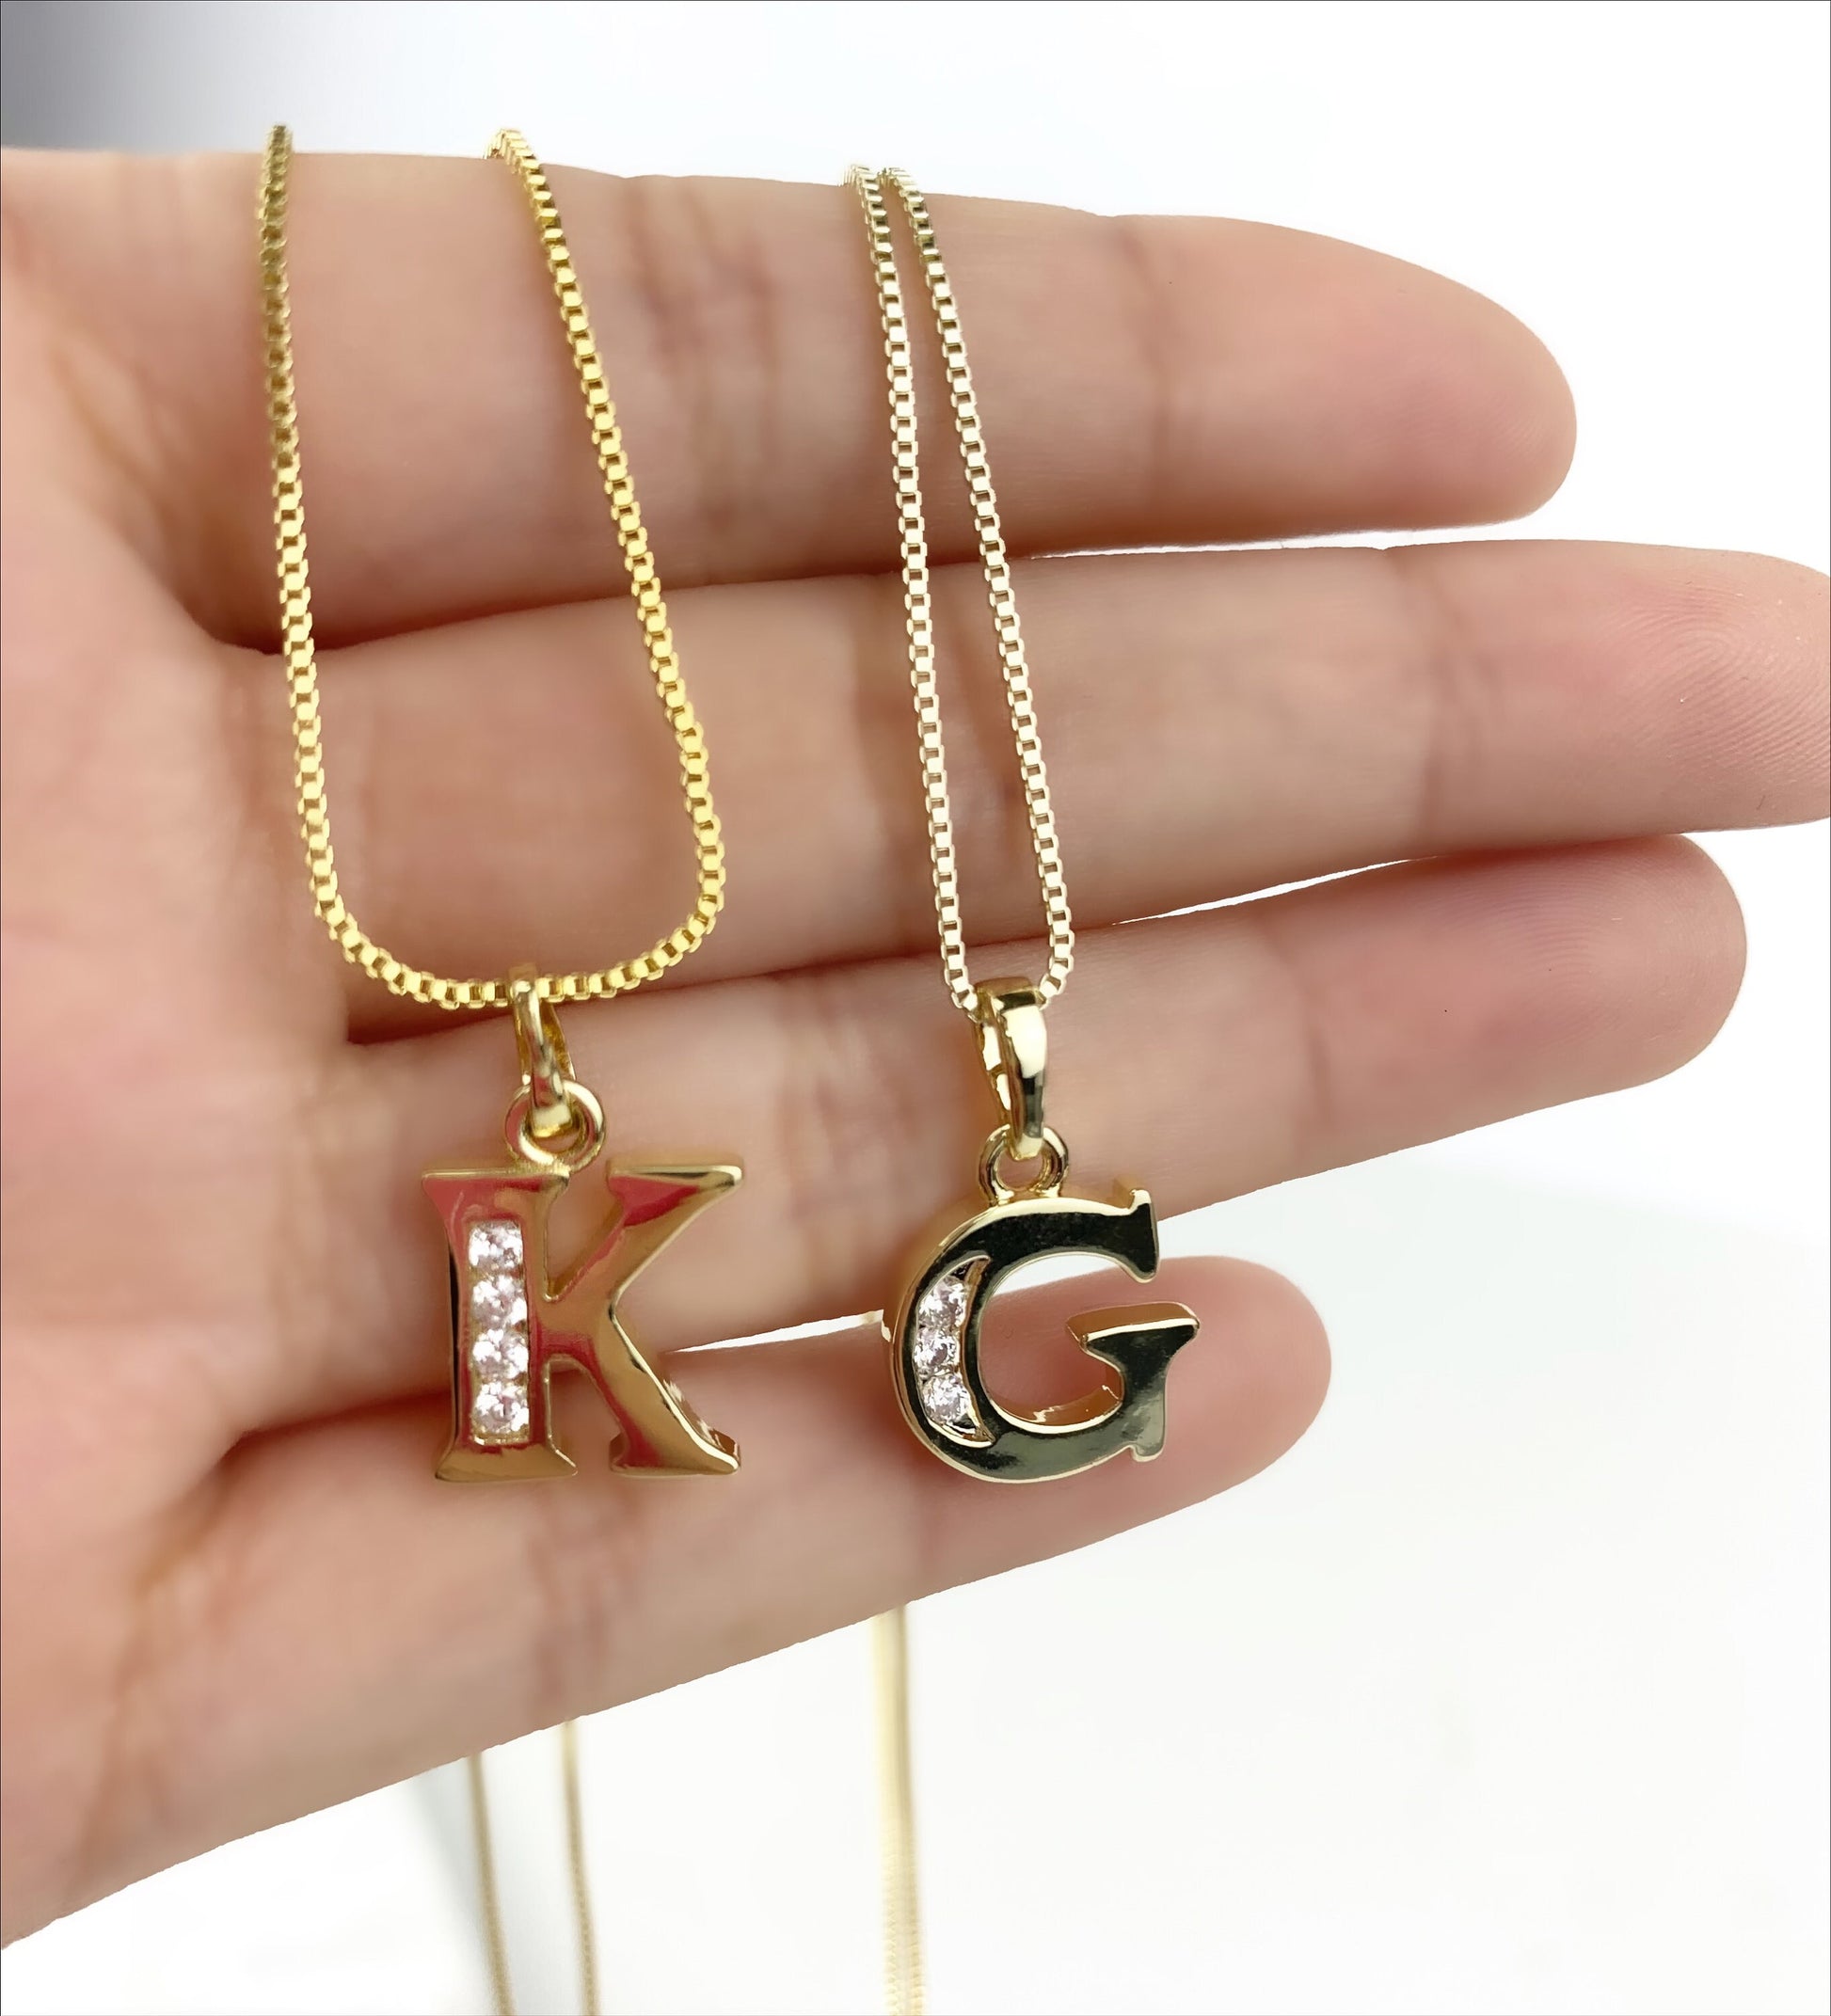 18k Gold Filled Fancy Initial Name Charm Necklace Wholesale Jewelry Supplies